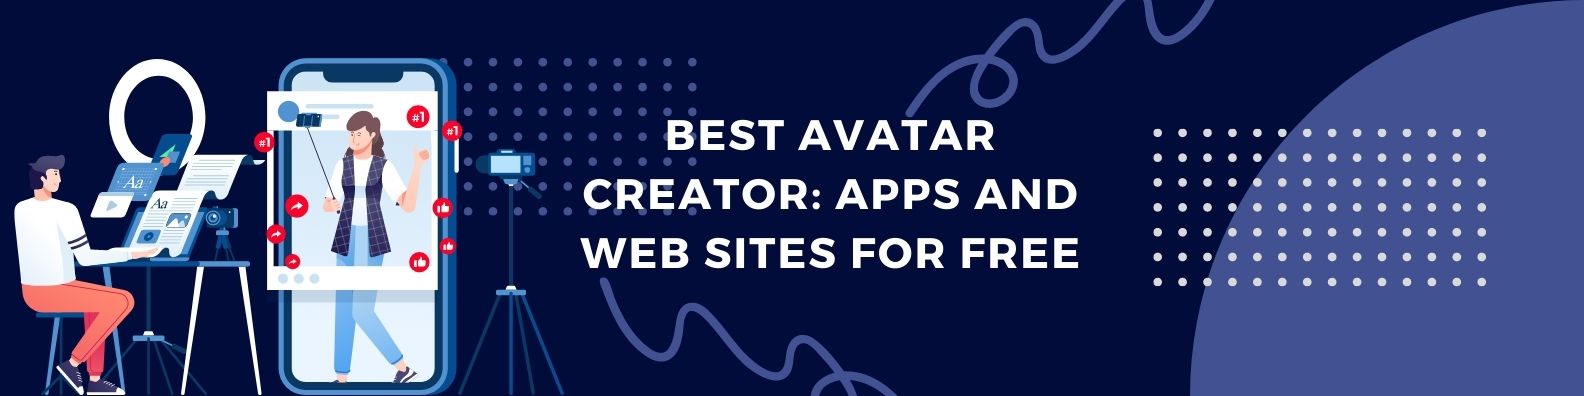 Best Avatar Creator Apps and Web Sites for Free